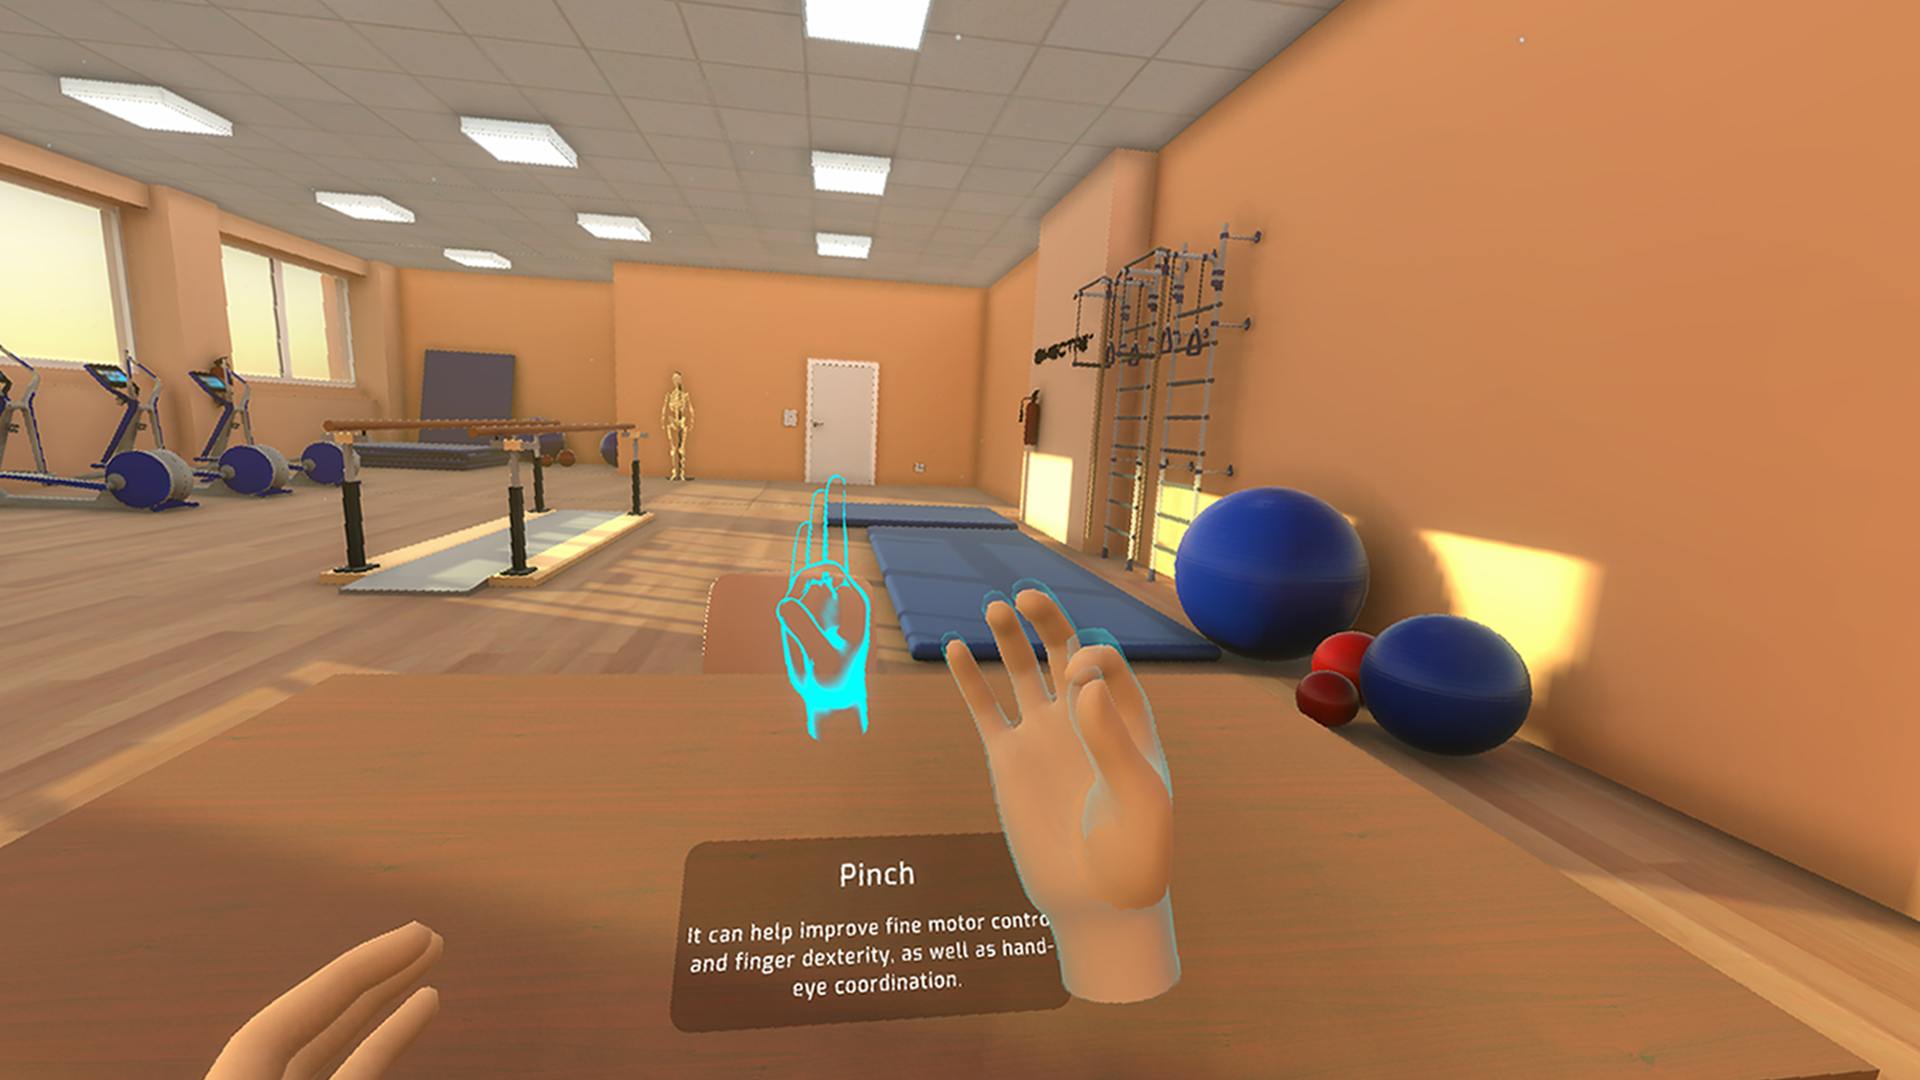 Showcasing the use of virtual reality and hand tracking technology in field of therapy and rehabilitation. Picture taken from Hand Therapy app available on Sidequest platform: 